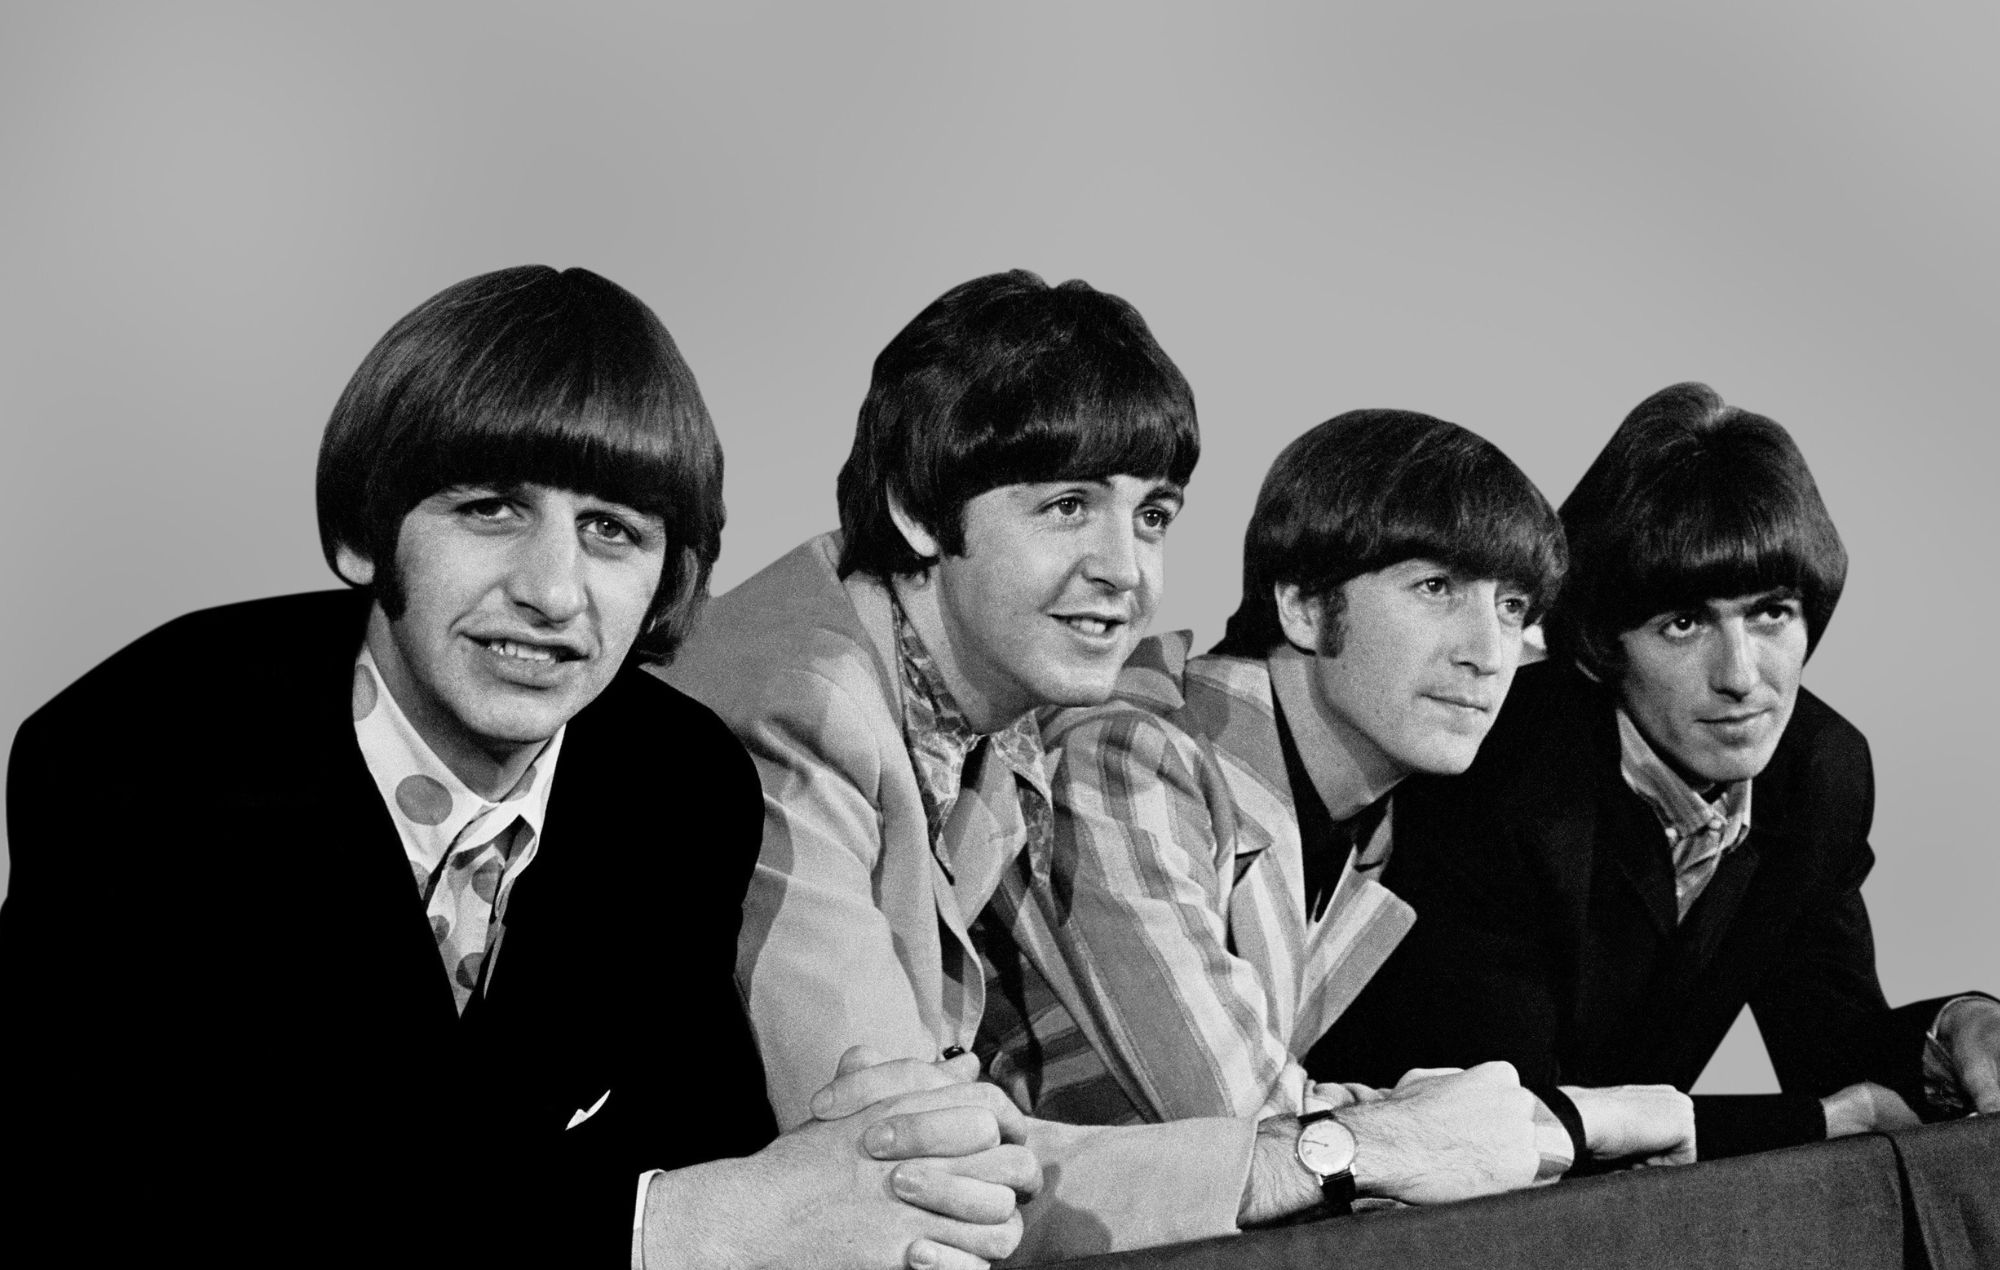 Ringo Starr didn’t think The Beatles would last: “I was going to open a hairdresser’s”